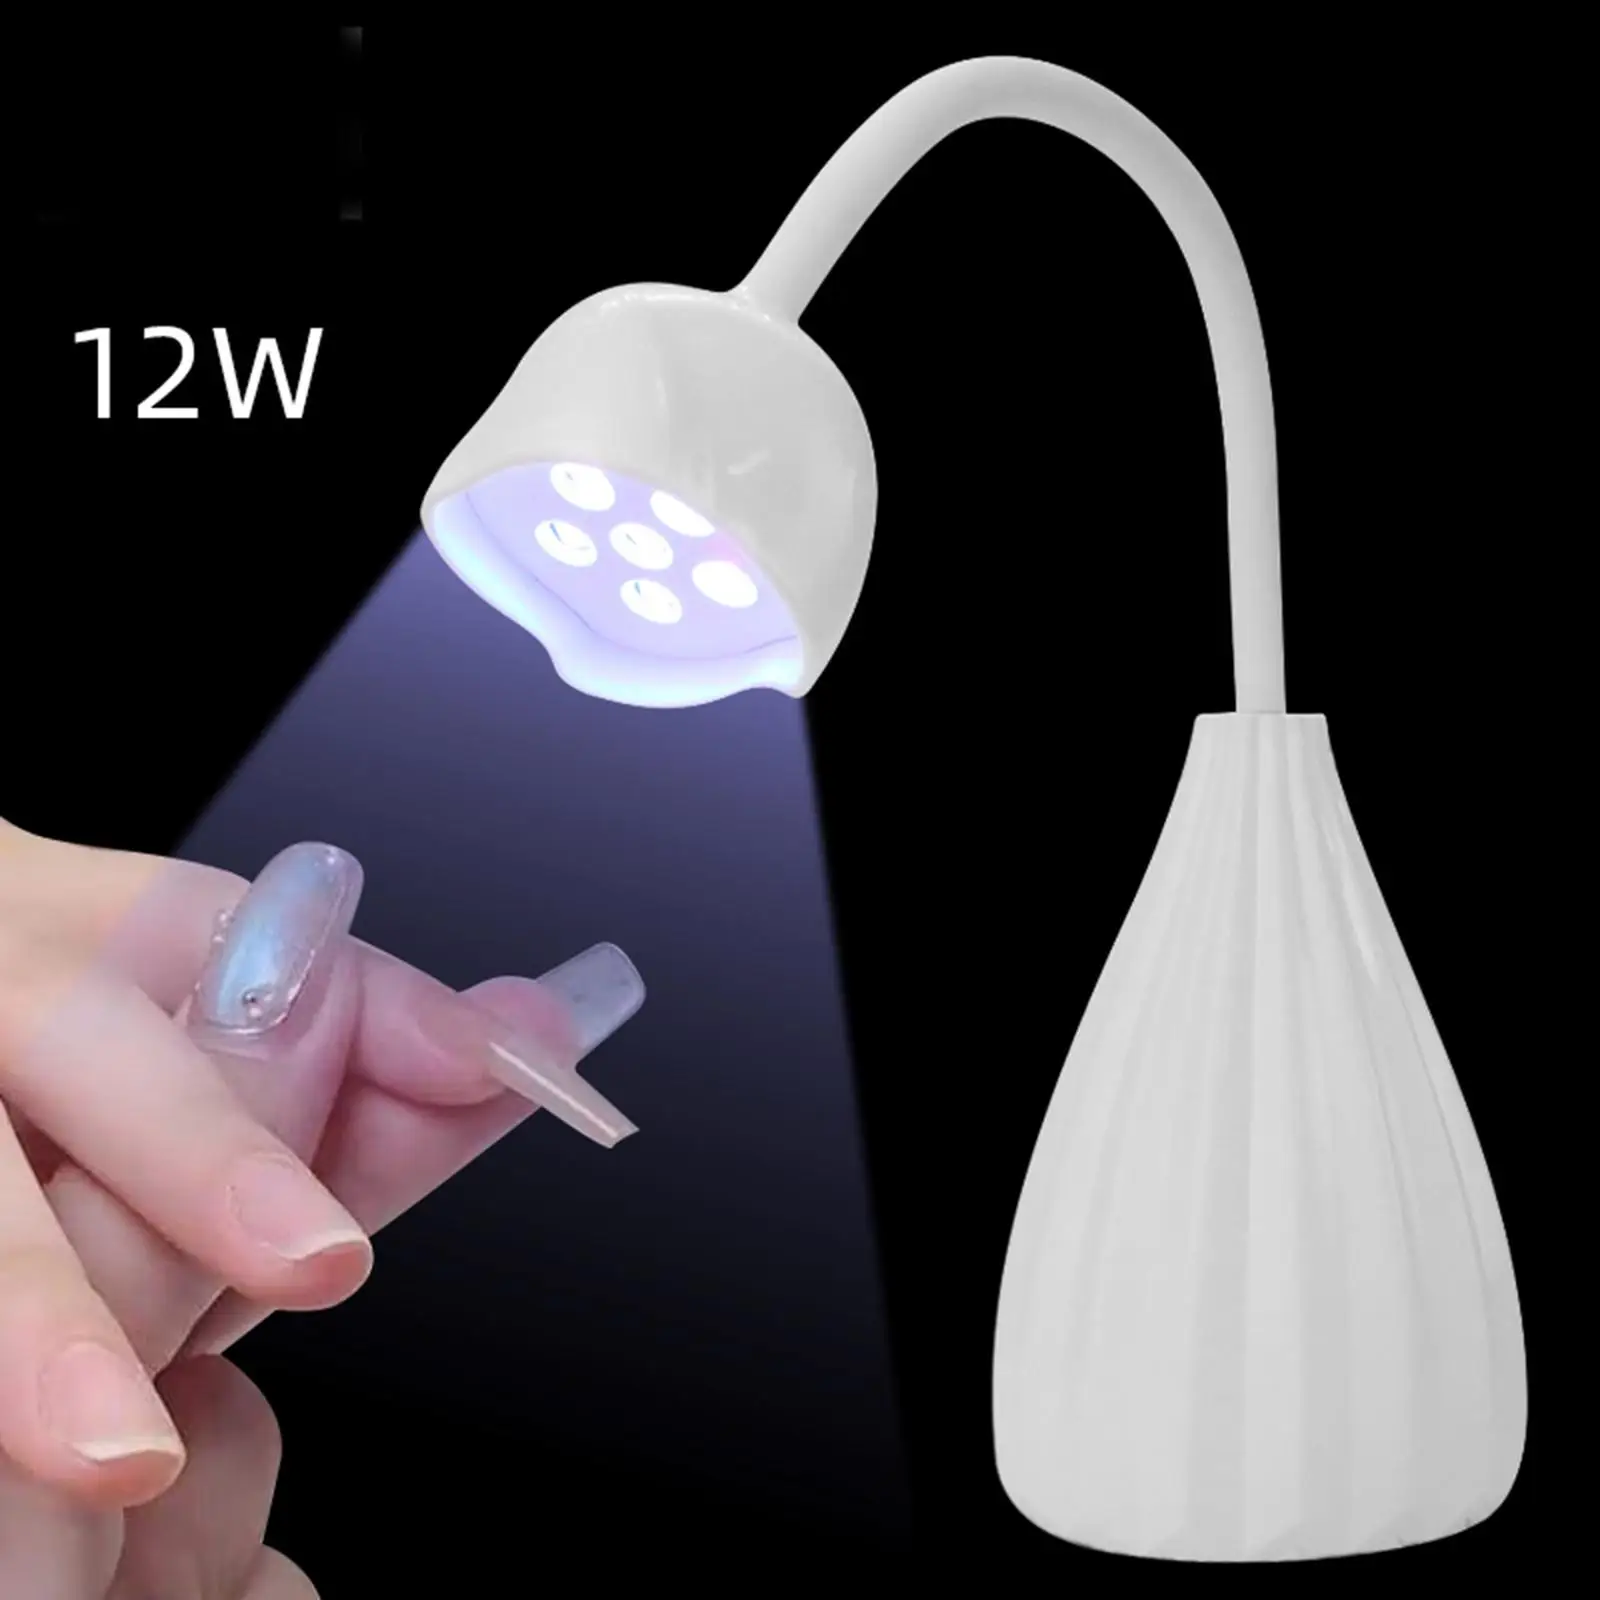 12W LED Nail Lamp Beauty Supplies Tools for  Salon Girls Women